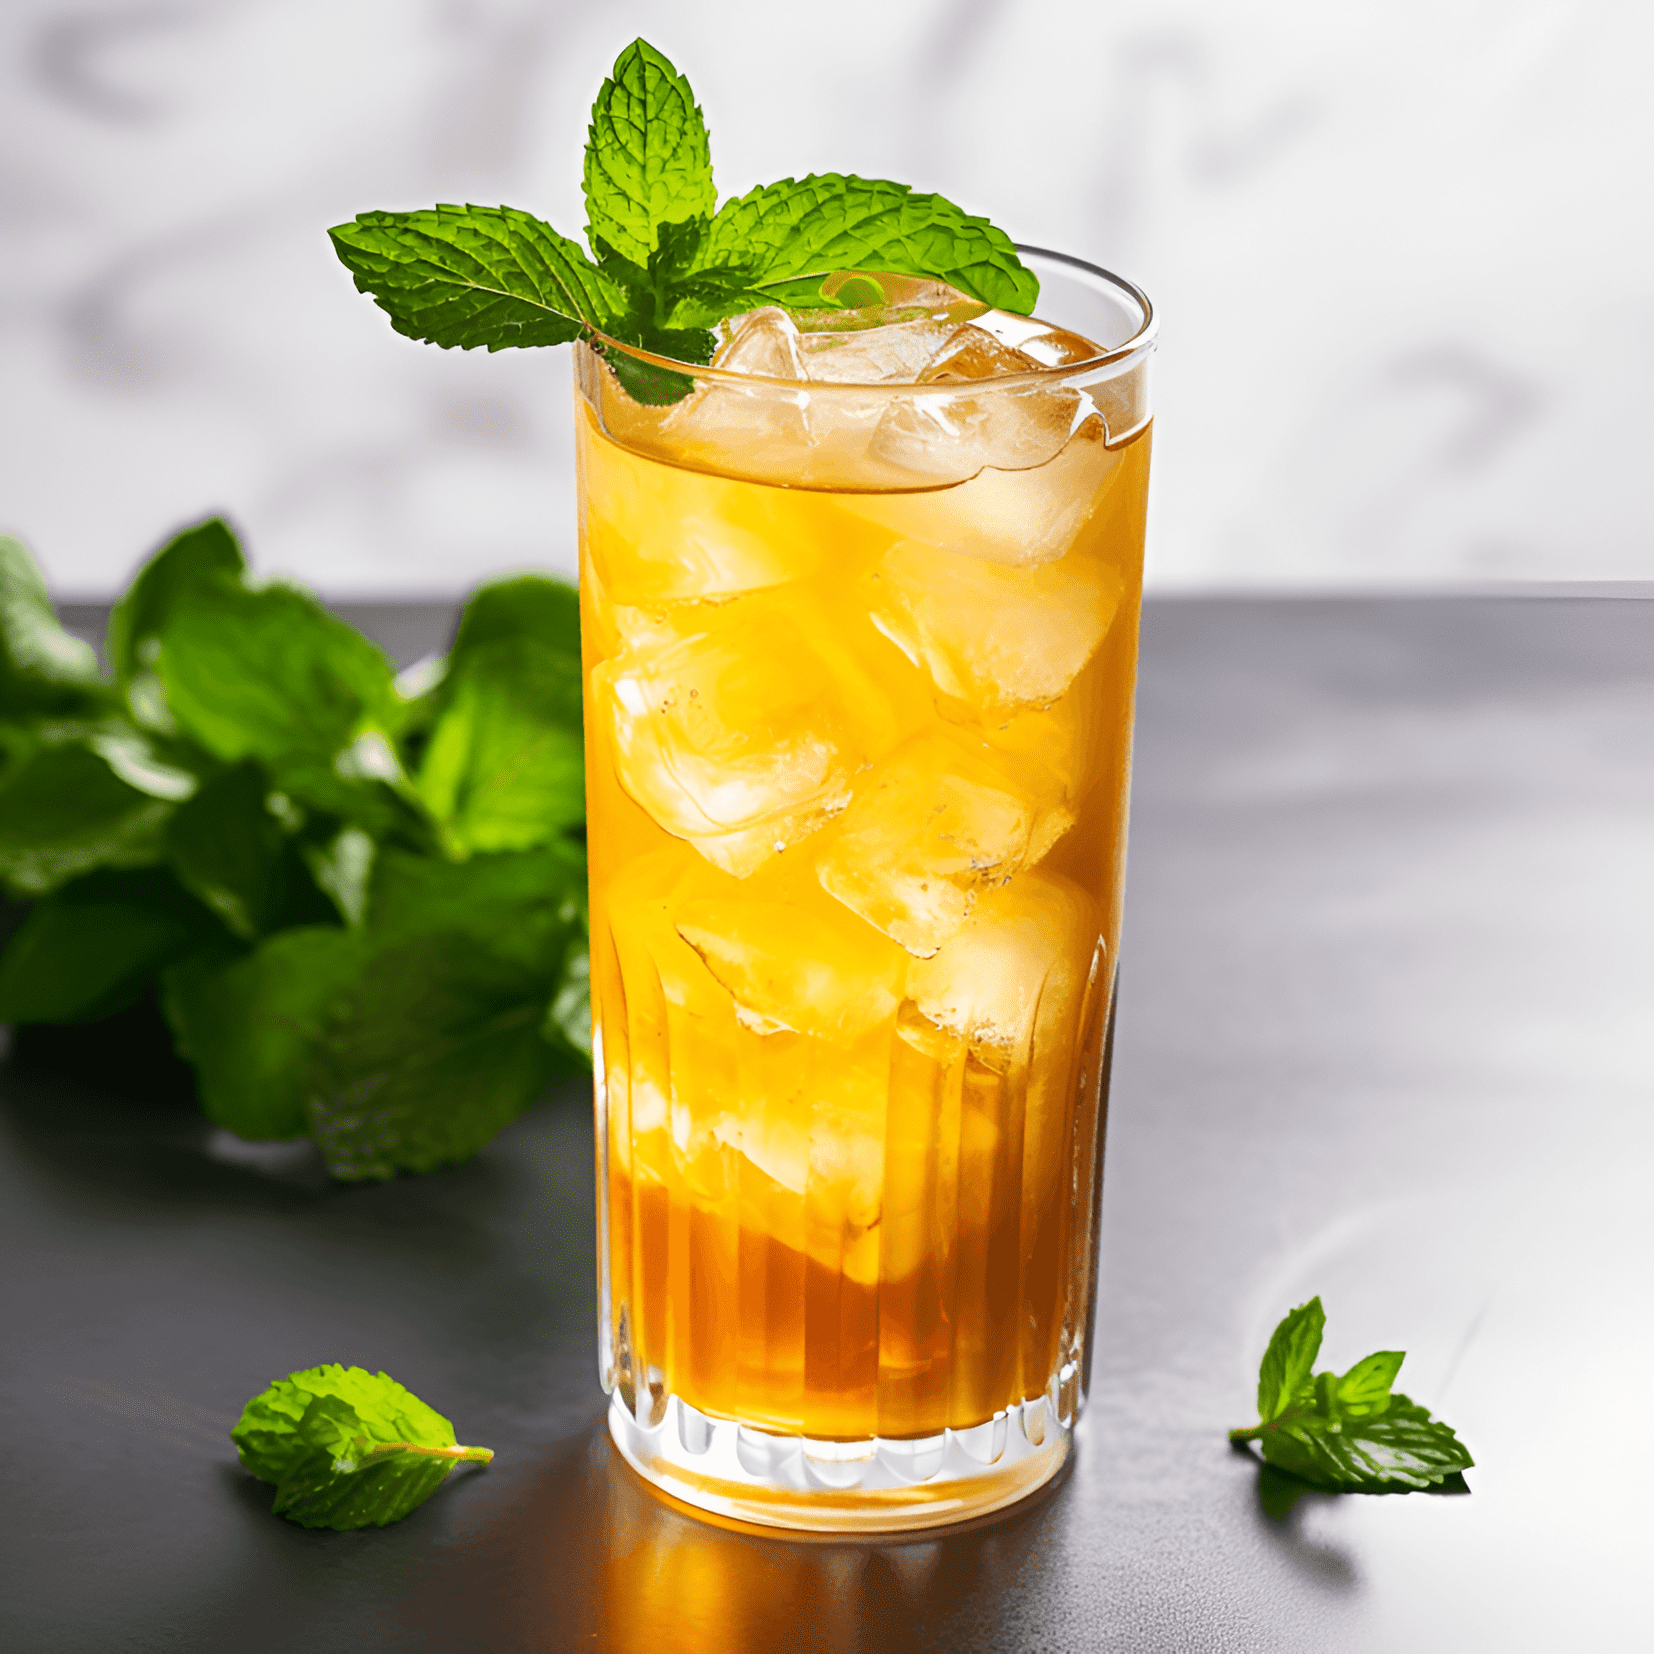 Southland Cocktail Recipe - The Southland cocktail is a harmonious blend of sweet, sour, and fruity flavors. It has a light, refreshing taste with a hint of tartness from the citrus fruits. The cocktail is well-balanced and not overly sweet, making it perfect for sipping on a warm summer evening.